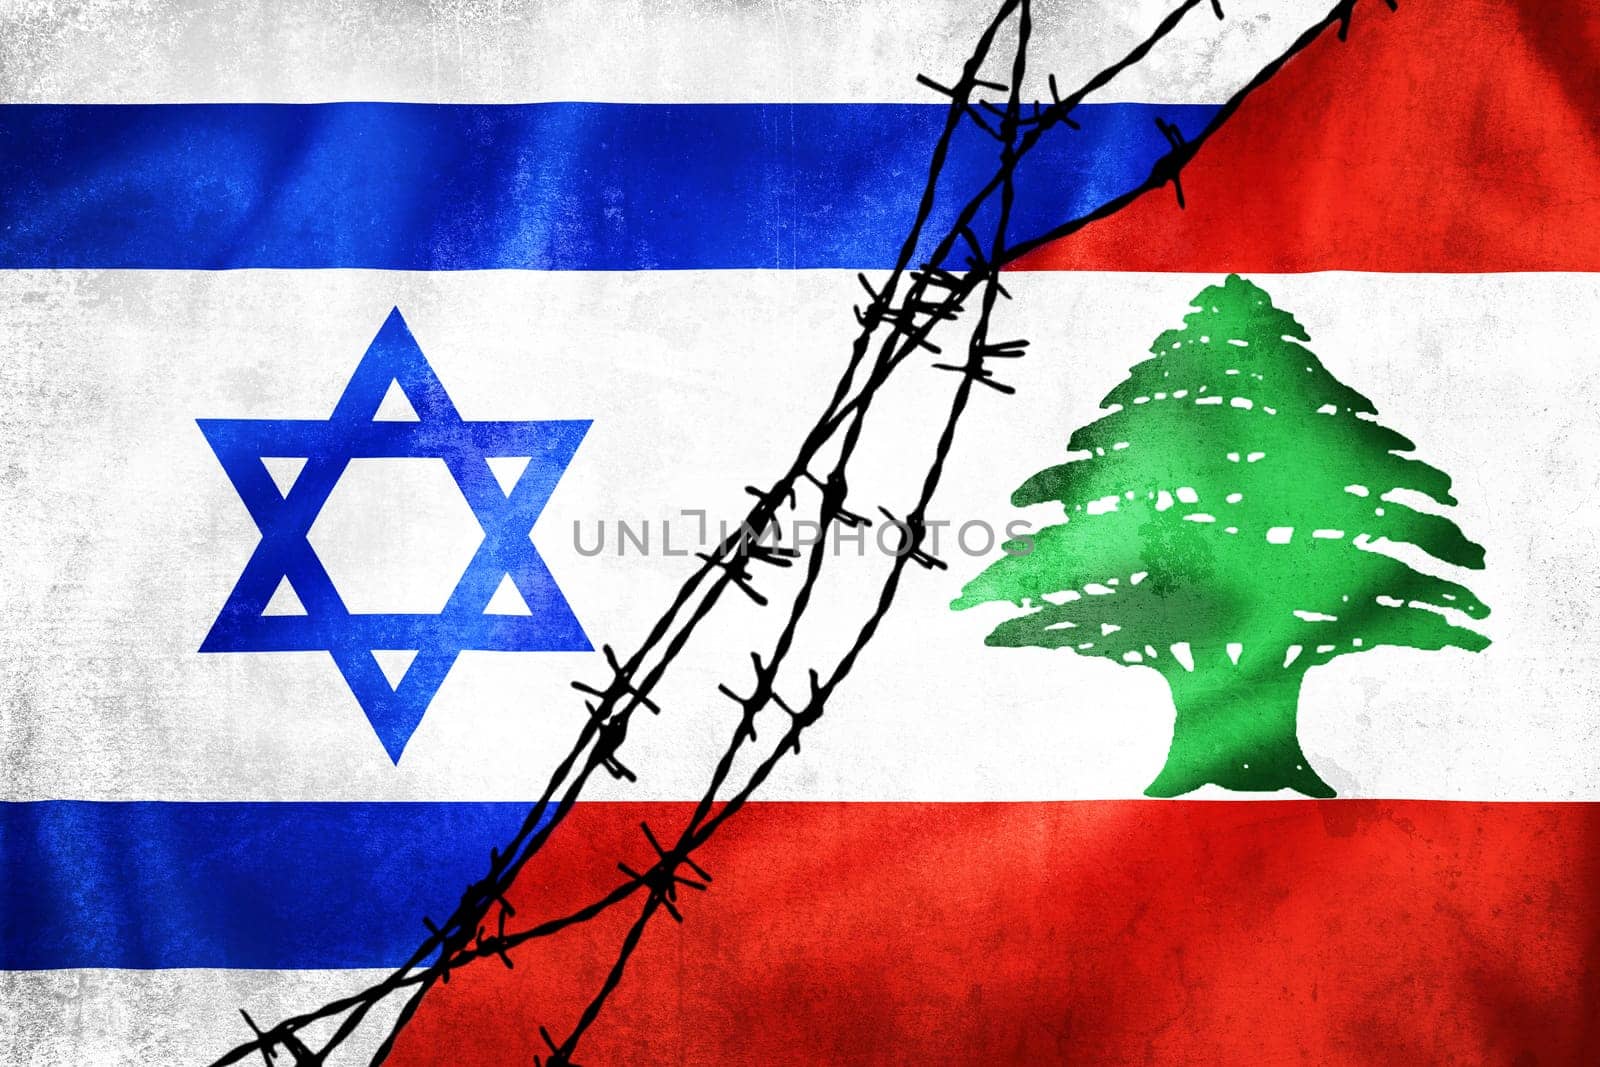 Grunge flags of Israel and Lebanon divided by barb wire illustration, concept of tense relations between Israel and Middle east states